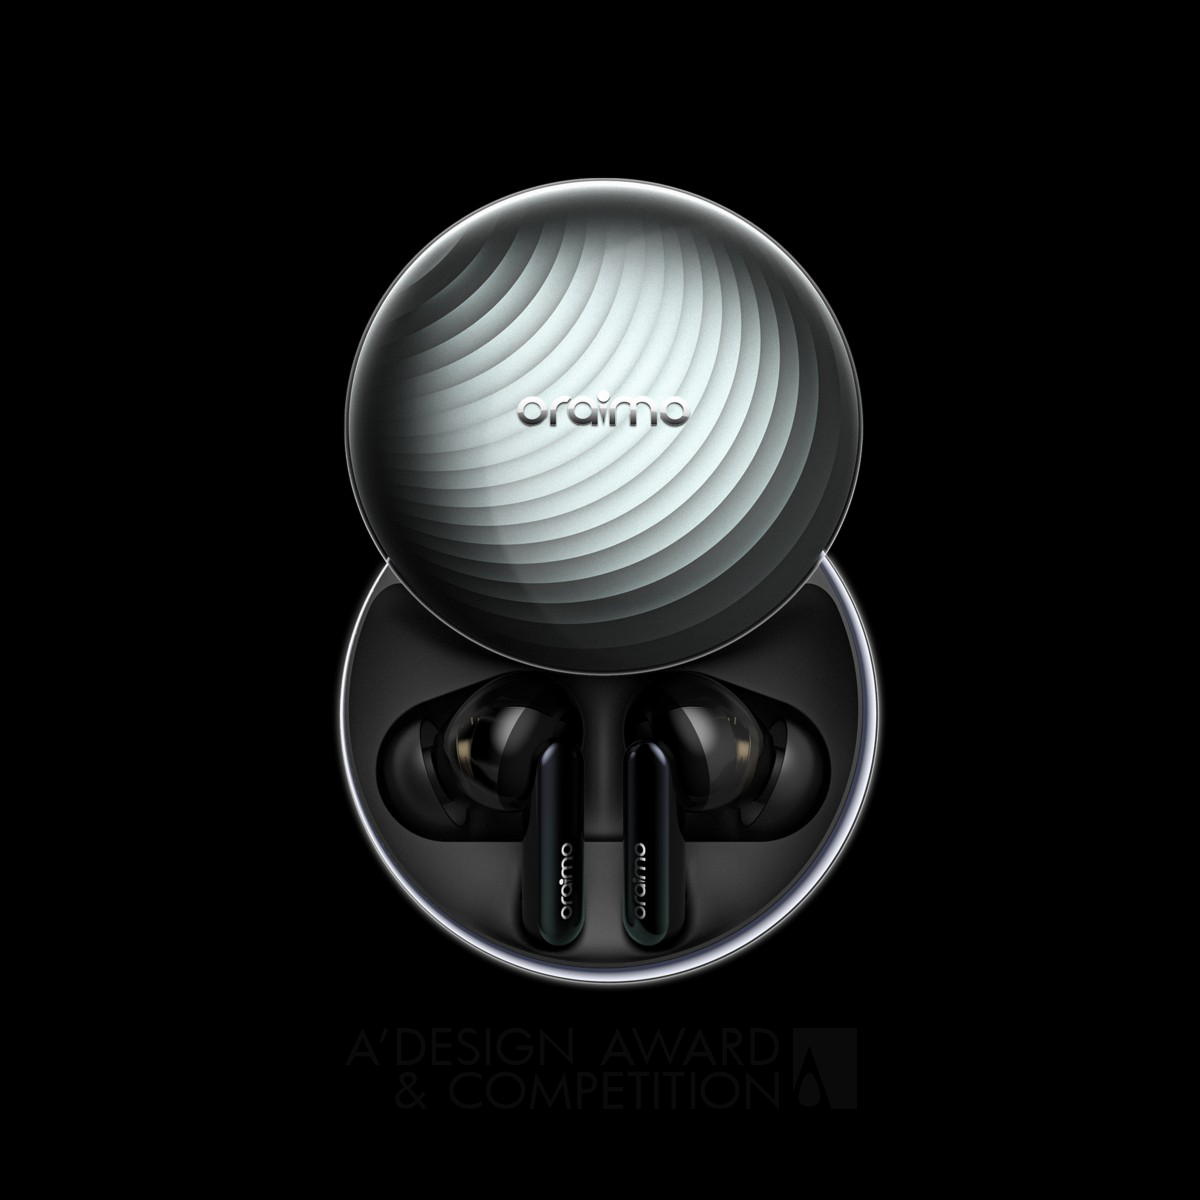 Shenzhen Transsion Holdings Co., Limited wins Iron at the prestigious A' Audio and Sound Equipment Design Award with Oraimo Free Pods 5 Bluetooth Headphones.